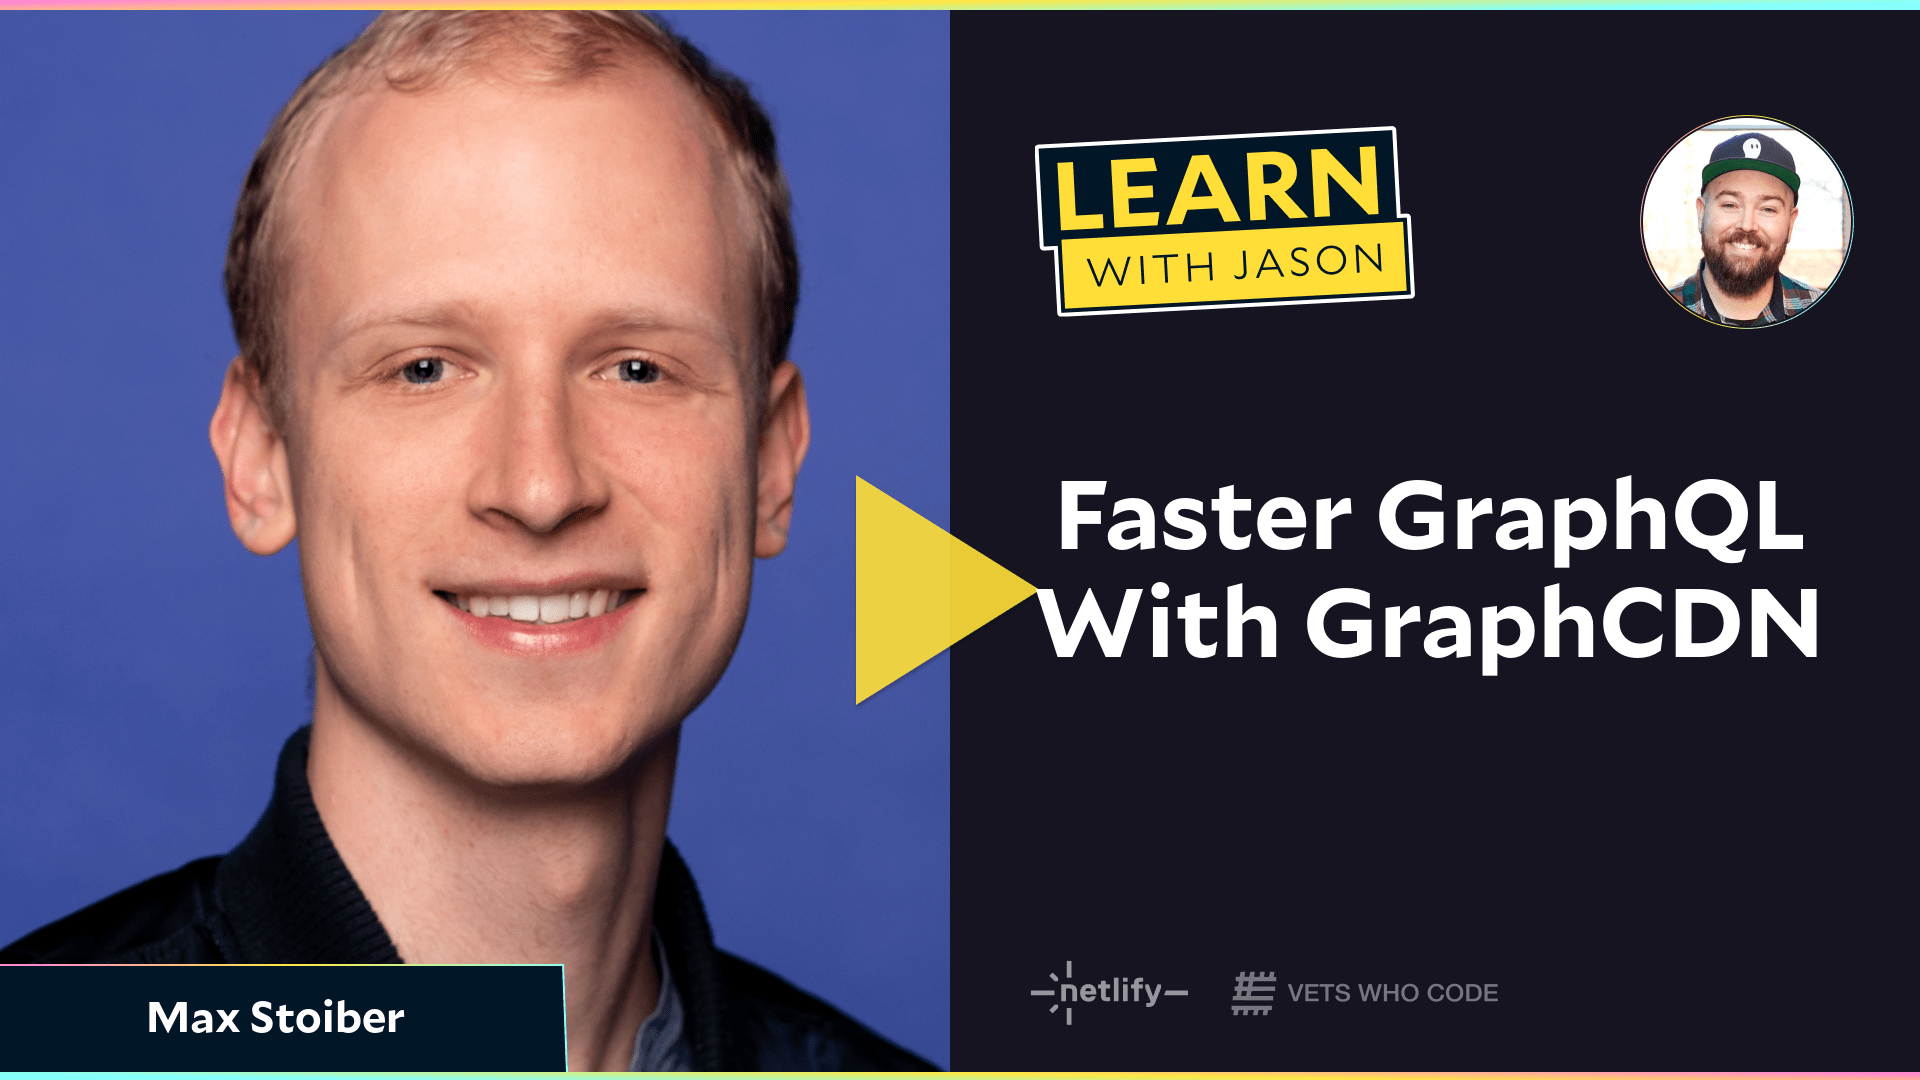  Faster GraphQL With GraphCDN (with Max Stoiber)